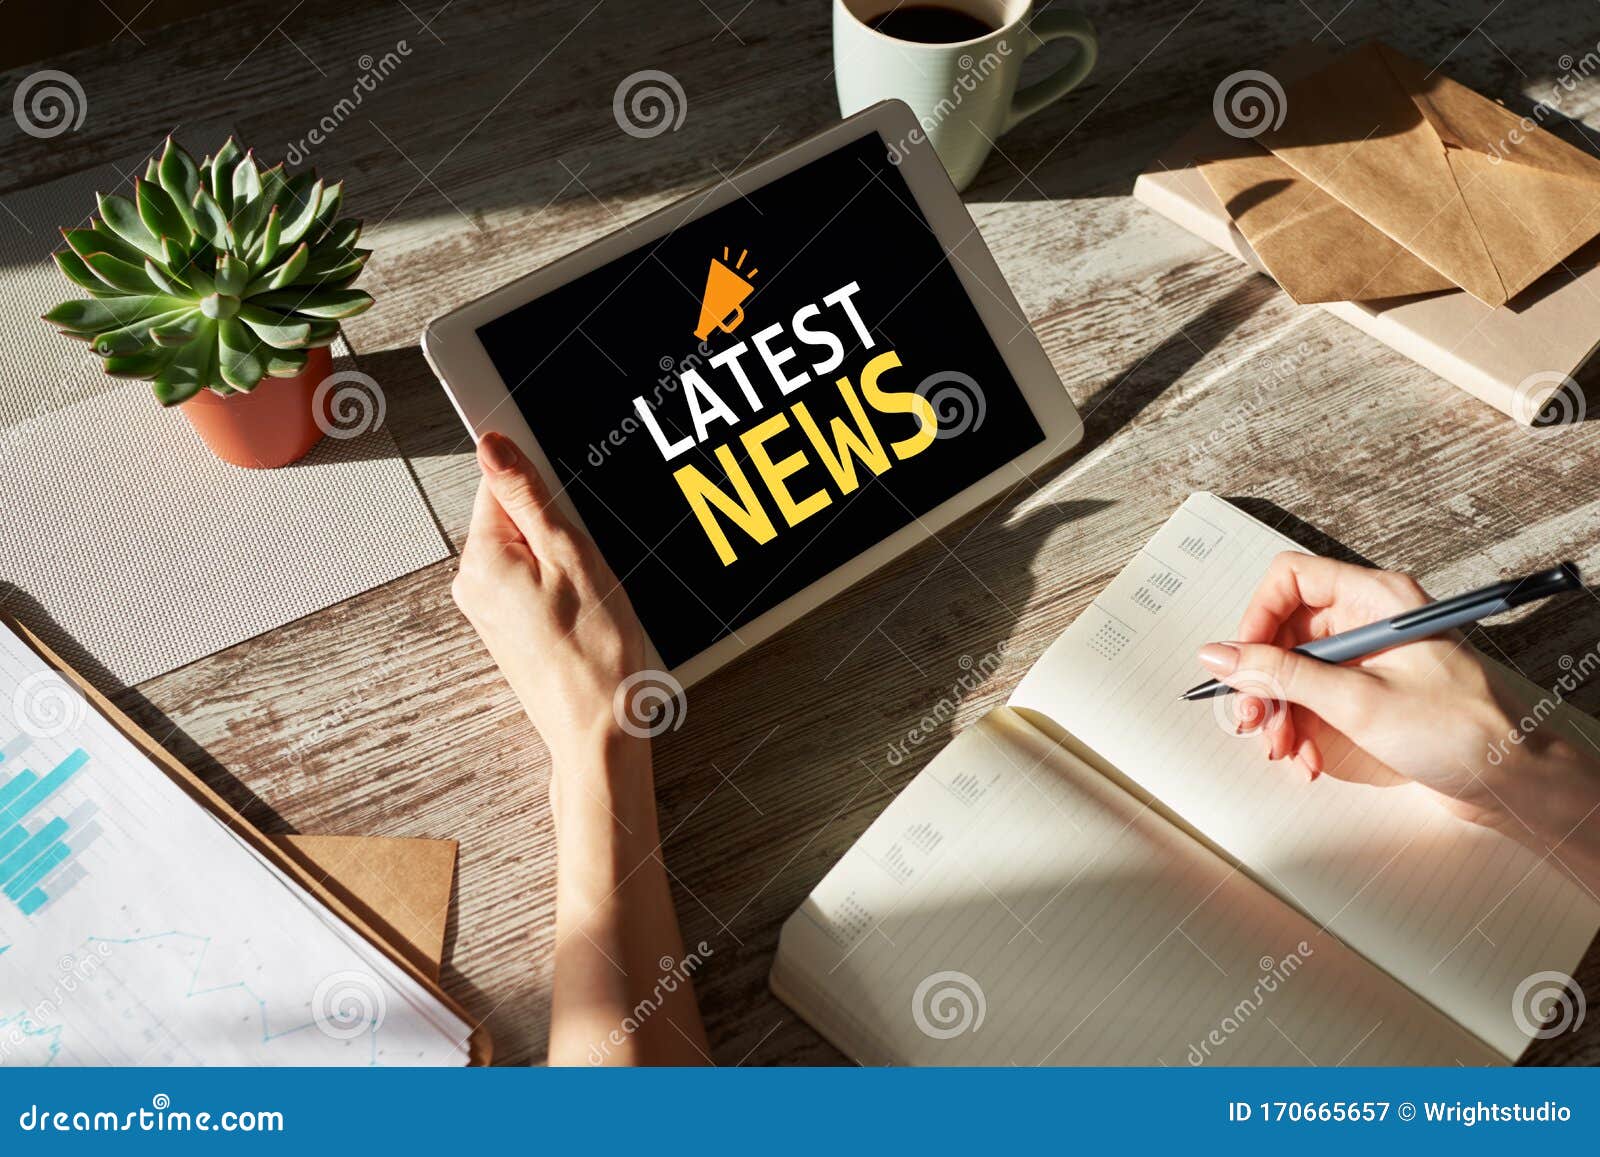 latest news text and icon on device screen. business internet and technology concept.